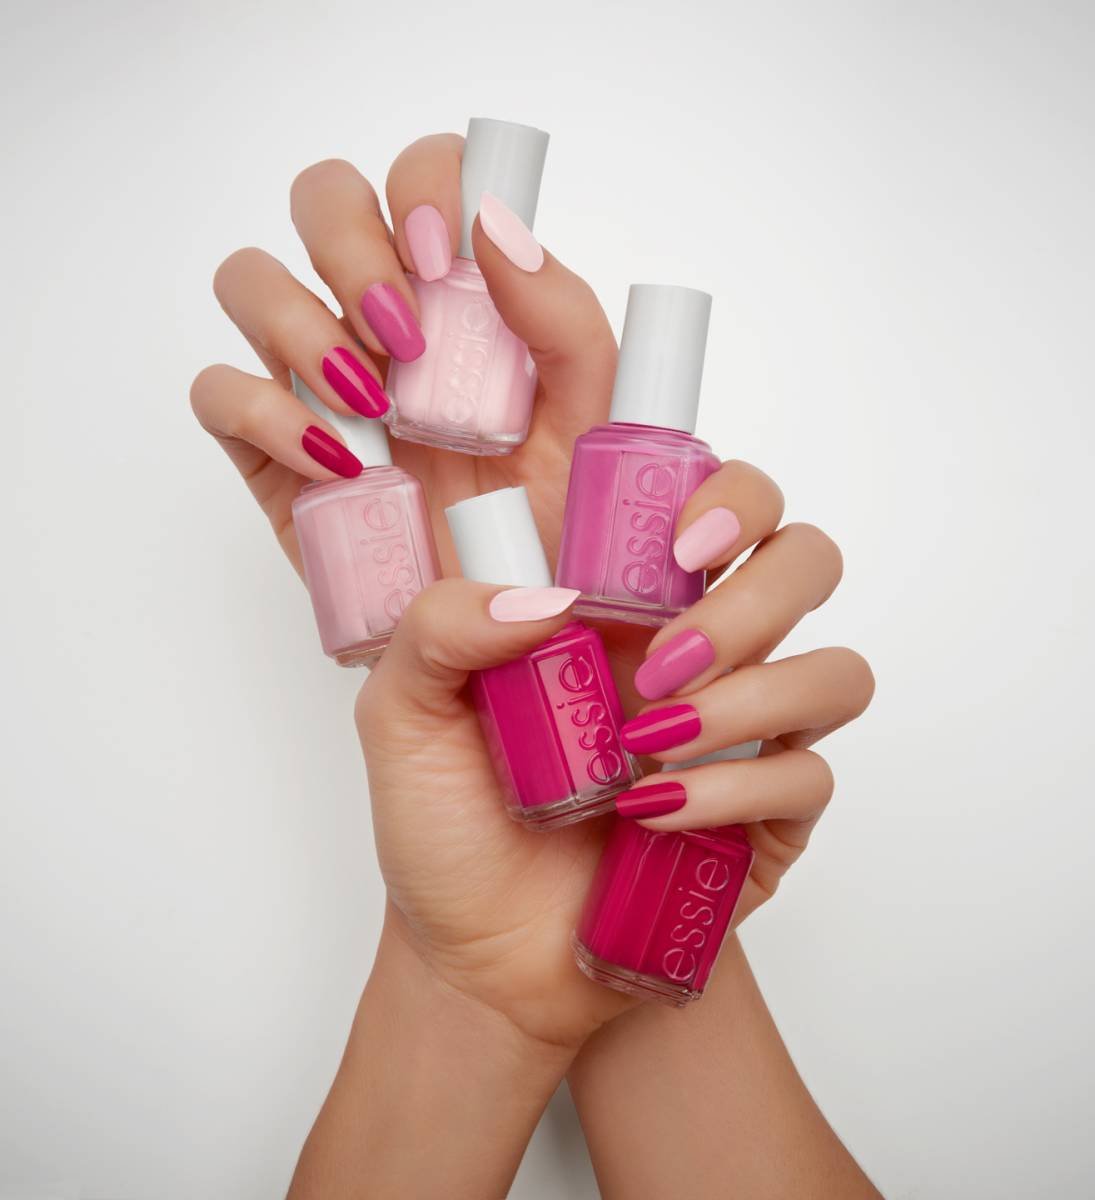 Essie Mod Squad | Nail varnish colours, Glamorous nails, Hair and nails